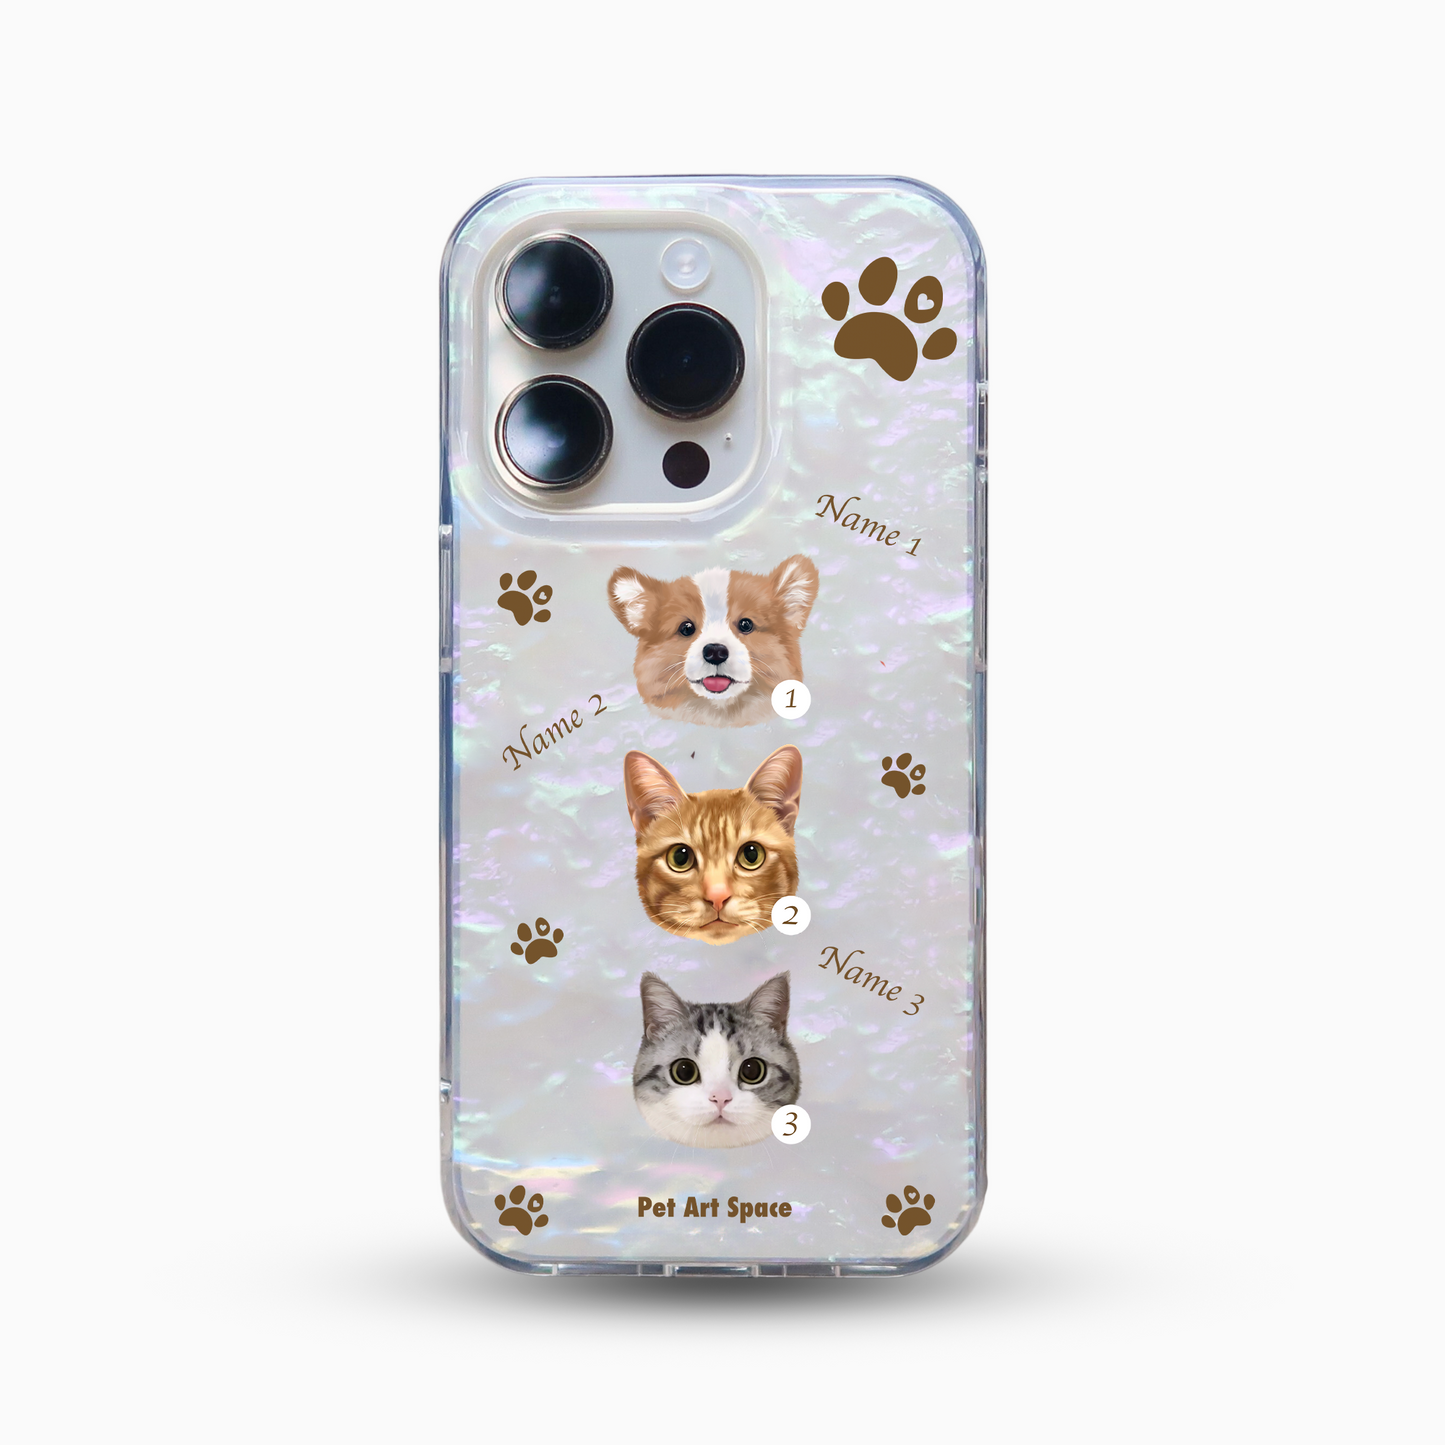 Paws for 3 Pets - Gorgeous Case